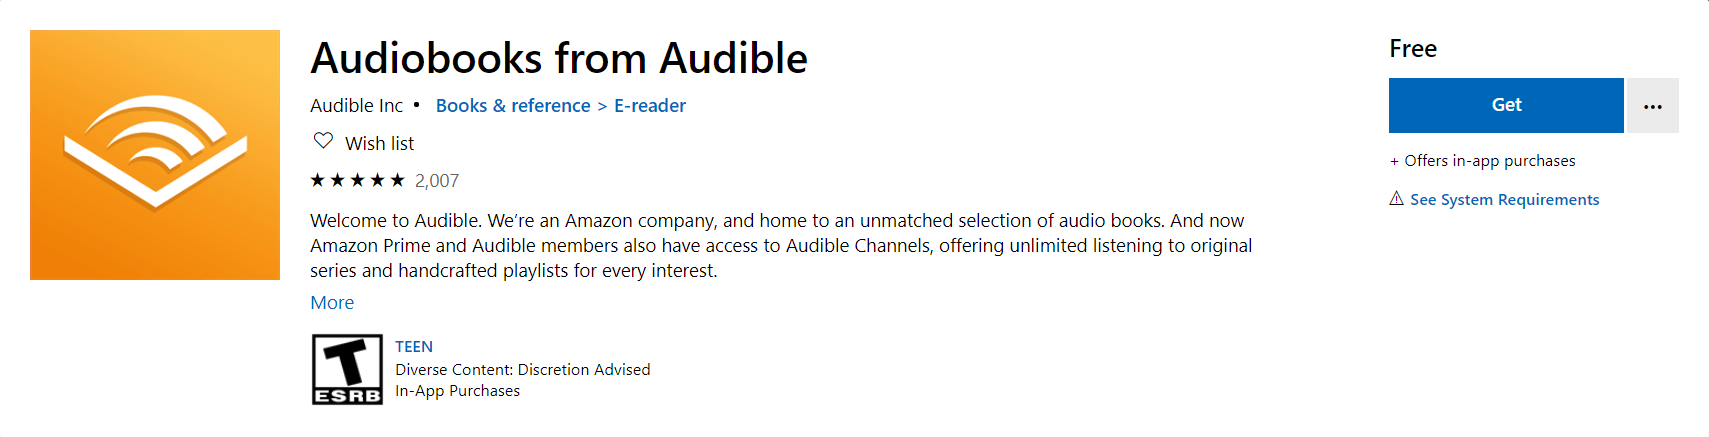 Get Audiobooks from Audible in Windows 10 Microsoft Store